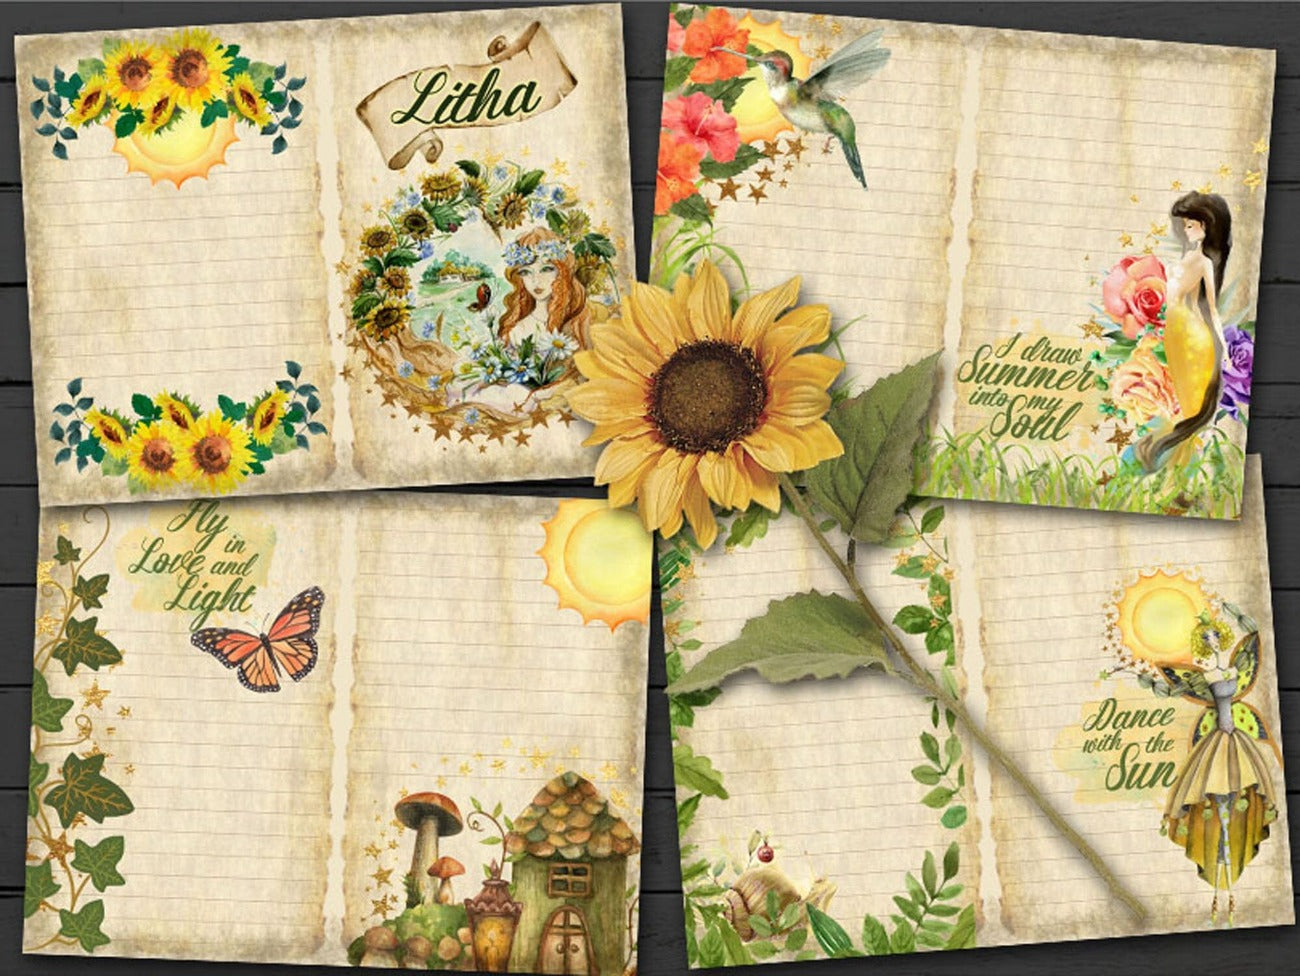 Four Litha pages including Litha front page, floral goddess page with the text “I draw summer into my soul”, butterfly and mushroom page “Fly in Love and Light”, and Fairy dancing in the sunlight “Dance with the sun.”